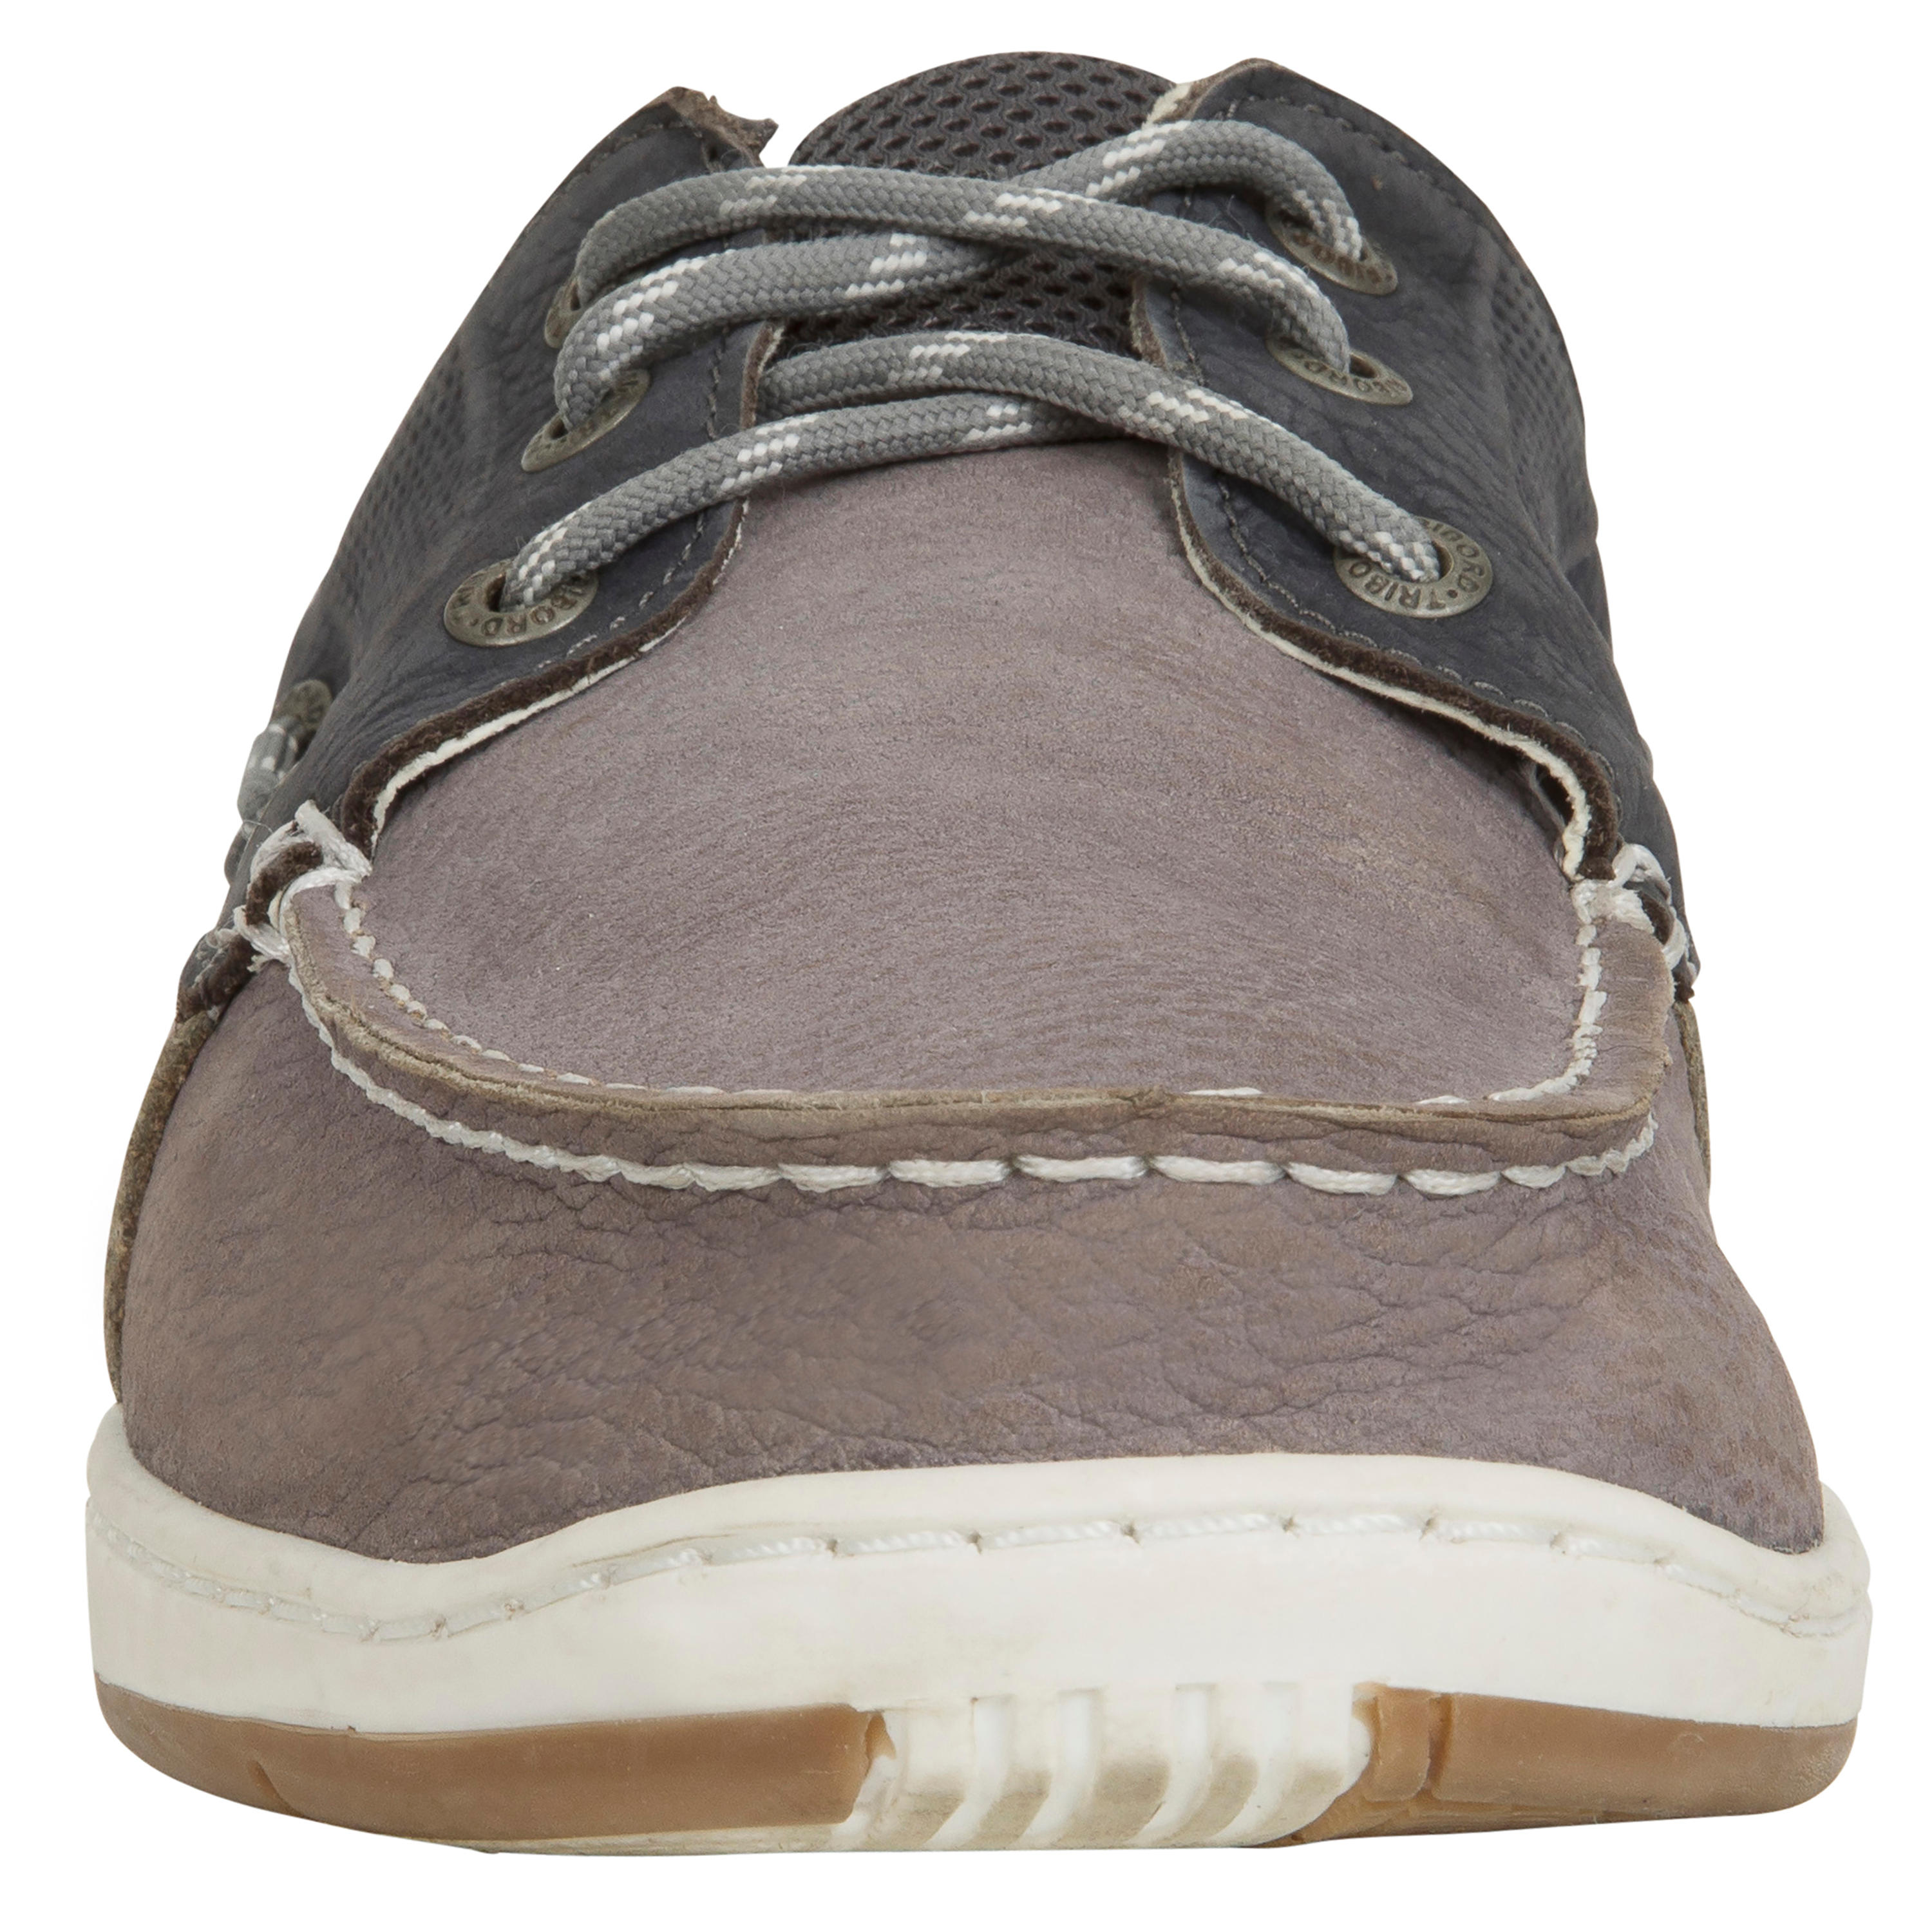 Men's Leather Boat Shoes CLIPPER - Grey 3/9